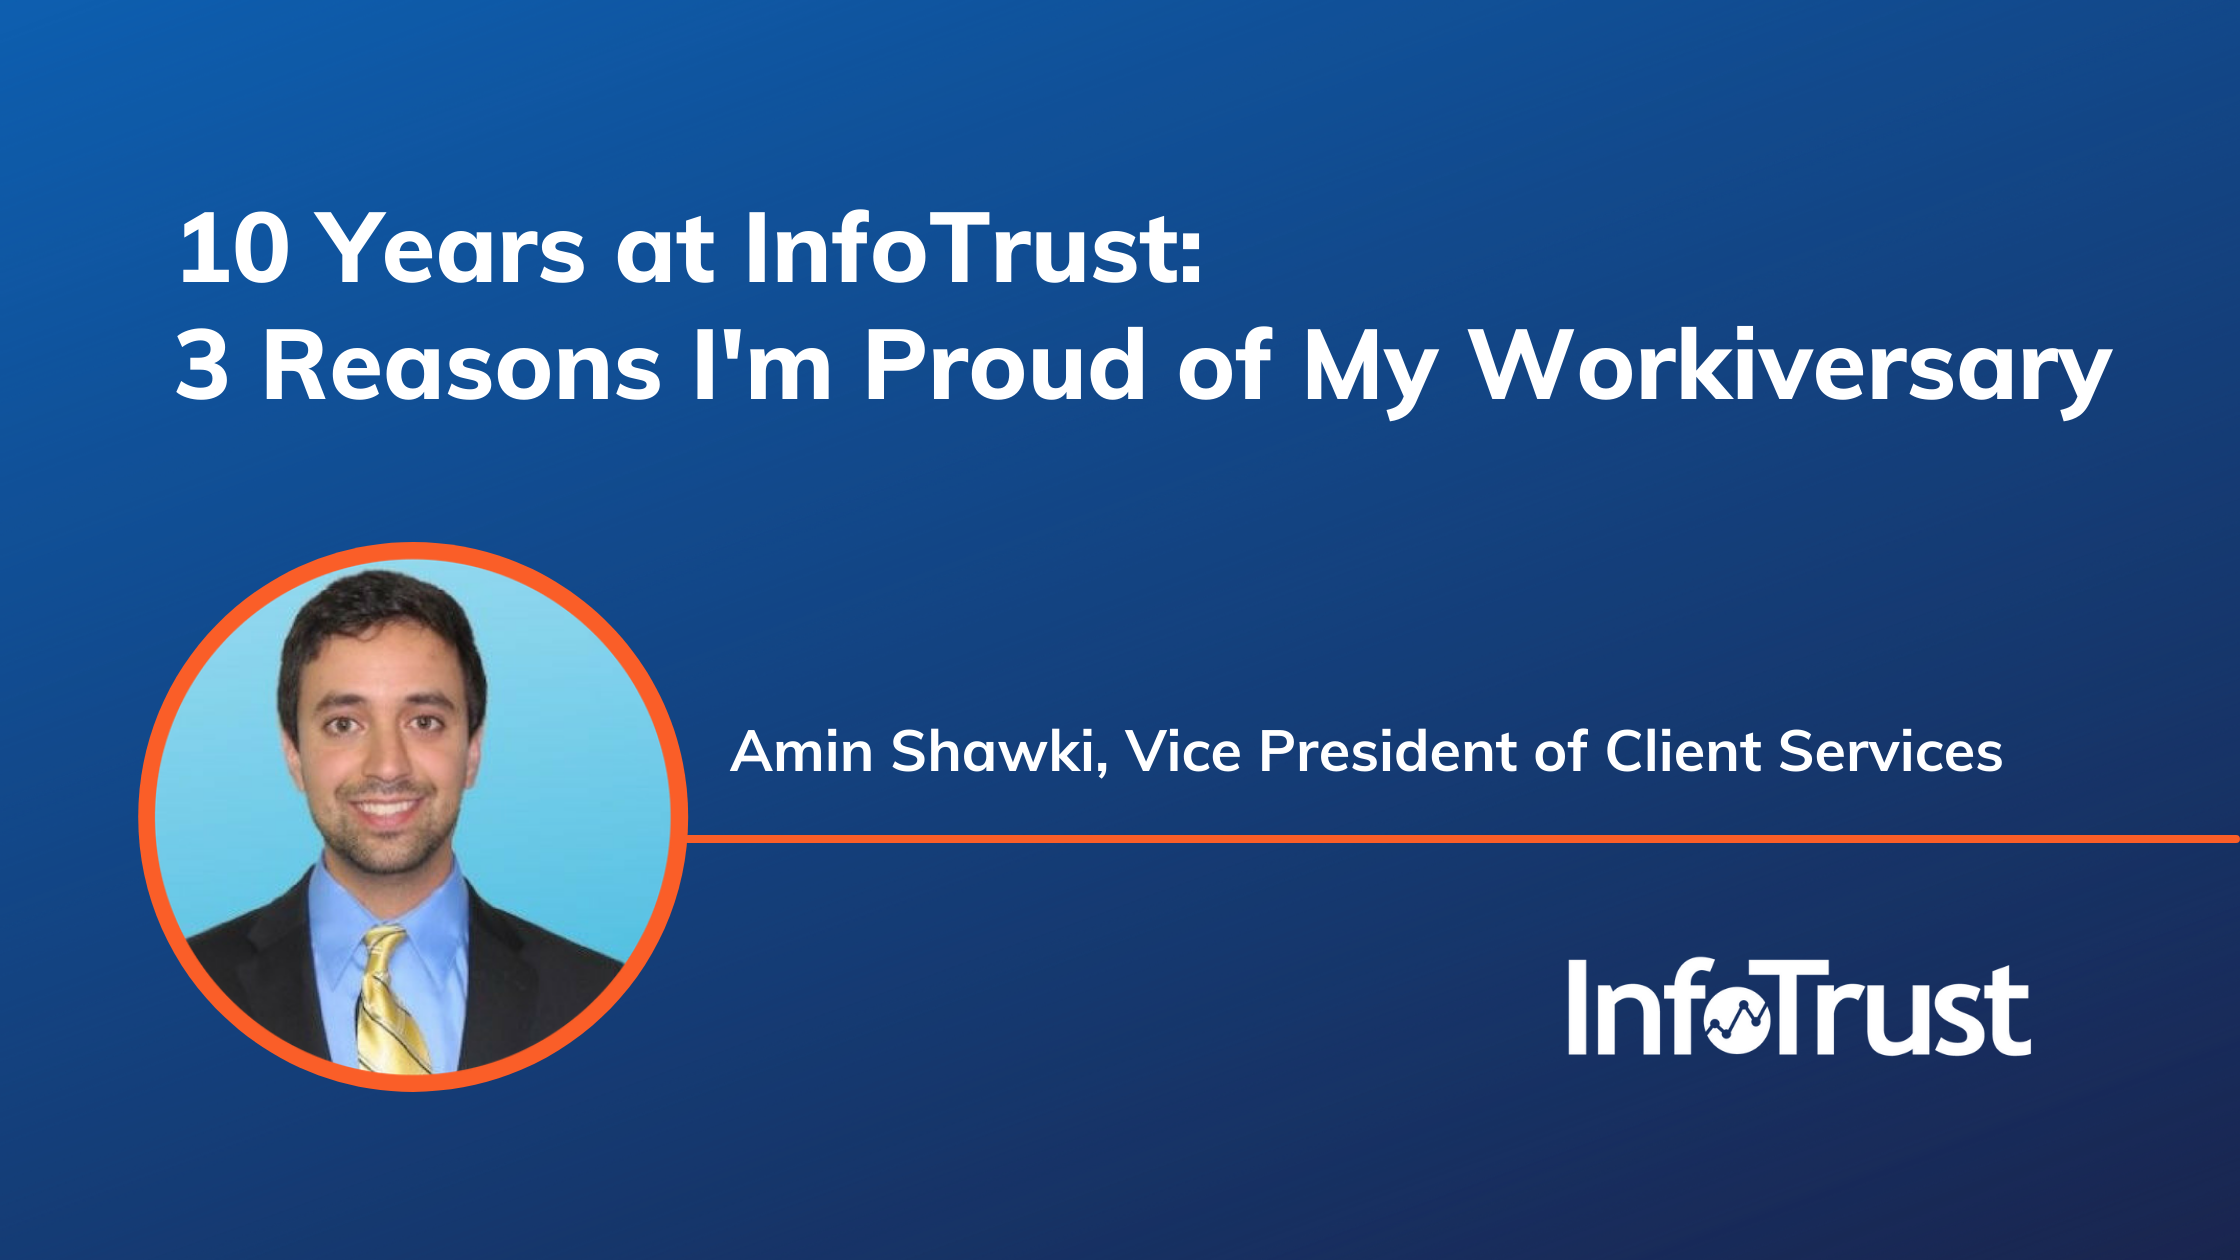 10 Years at InfoTrust: 3 Reasons I'm Proud of My Workiversary